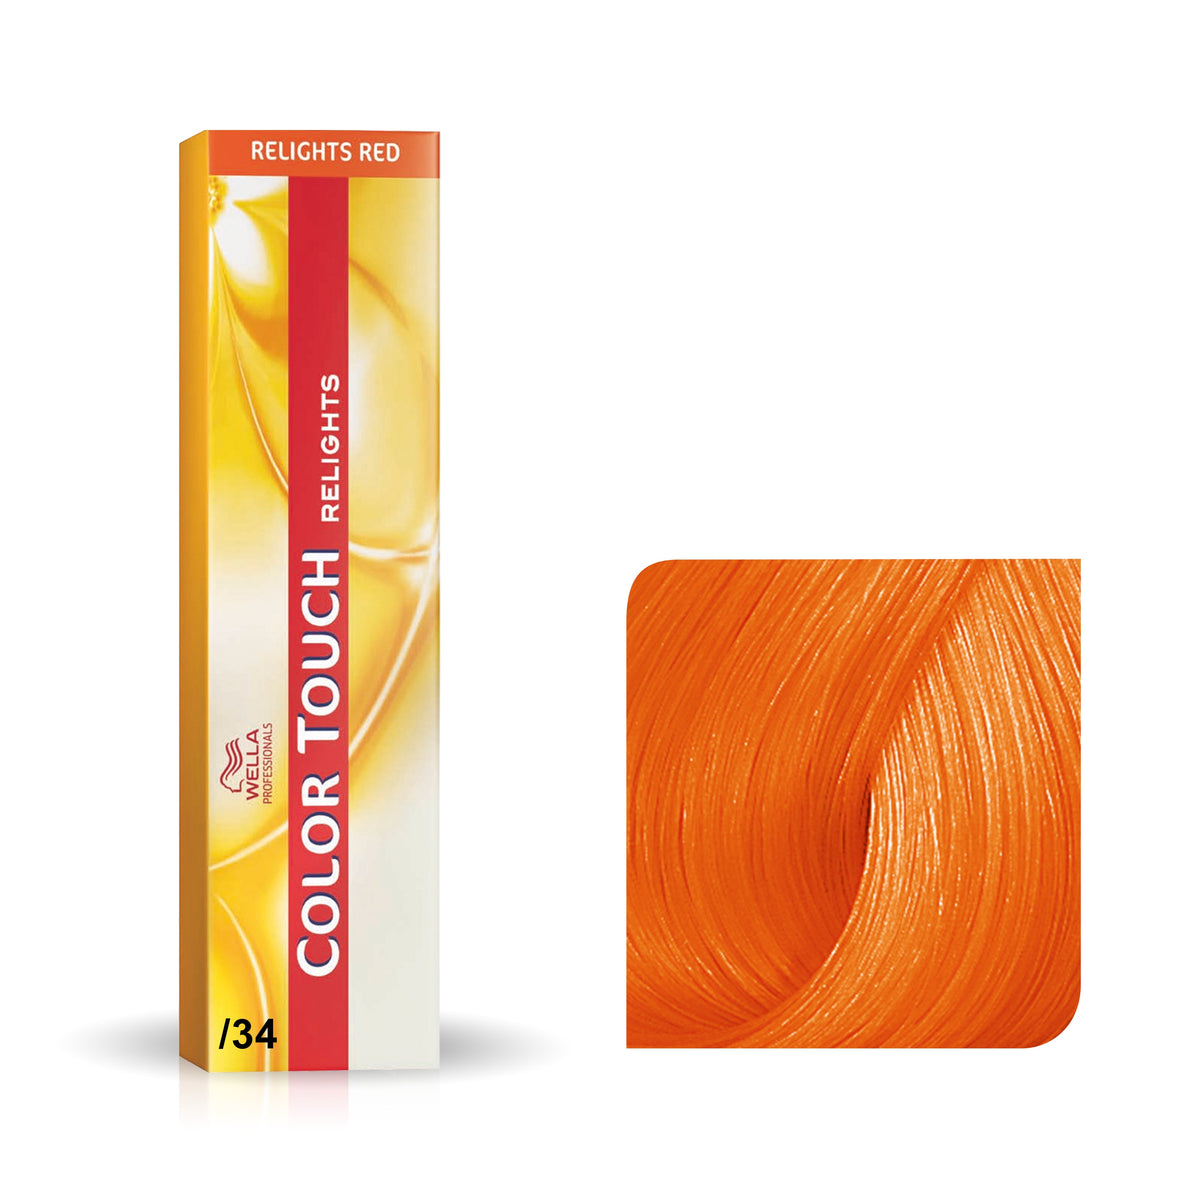 a tube of orange hair color next to a box